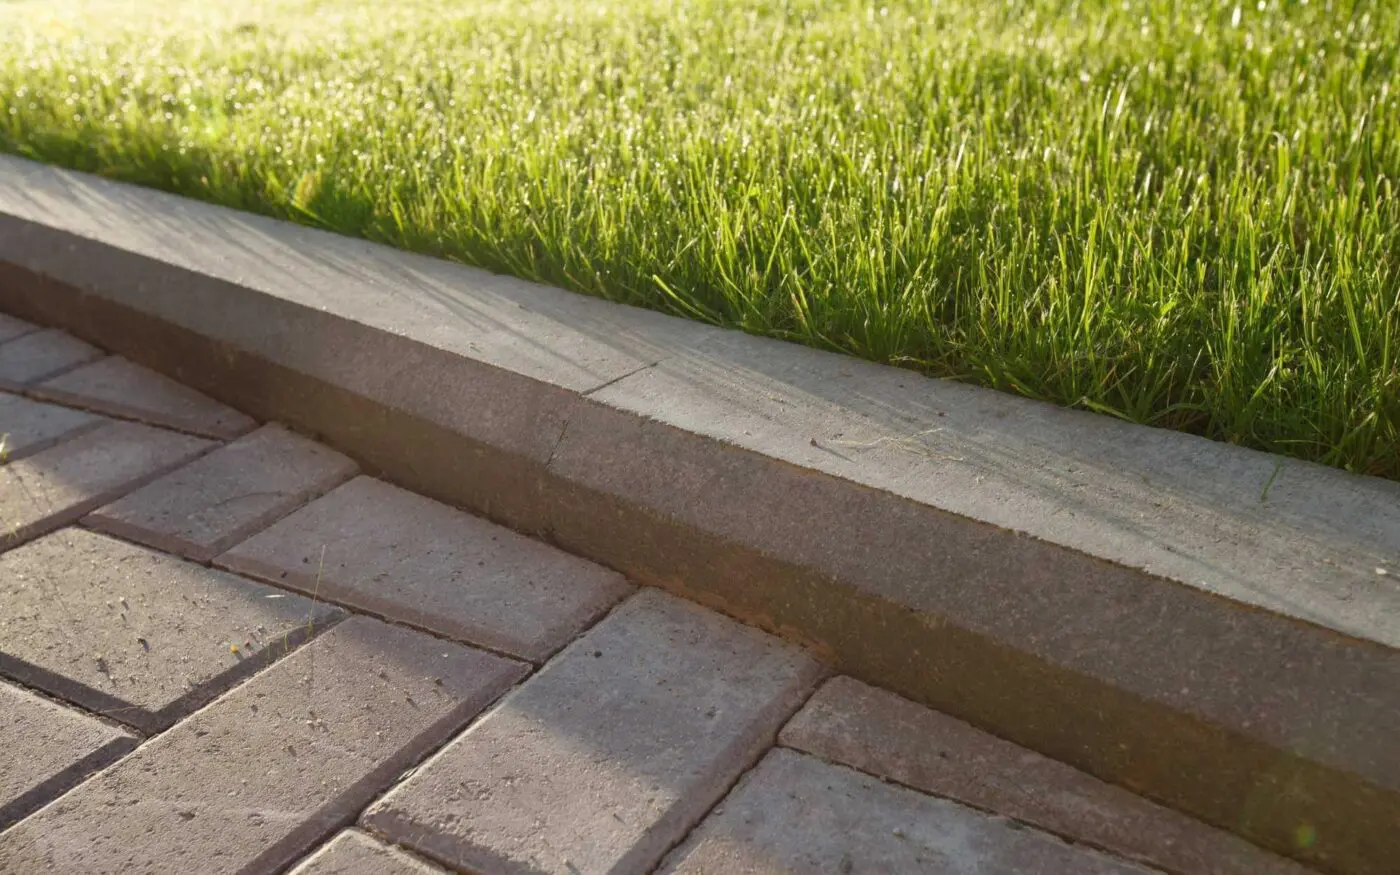 Close-up view of a concrete curb, expertly crafted by Reno Concrete Solutions, separating a paved walkway from a lush green lawn. Sunlight illuminates the grass, casting shadows on the pavement and curb. The area appears well-maintained and clean.